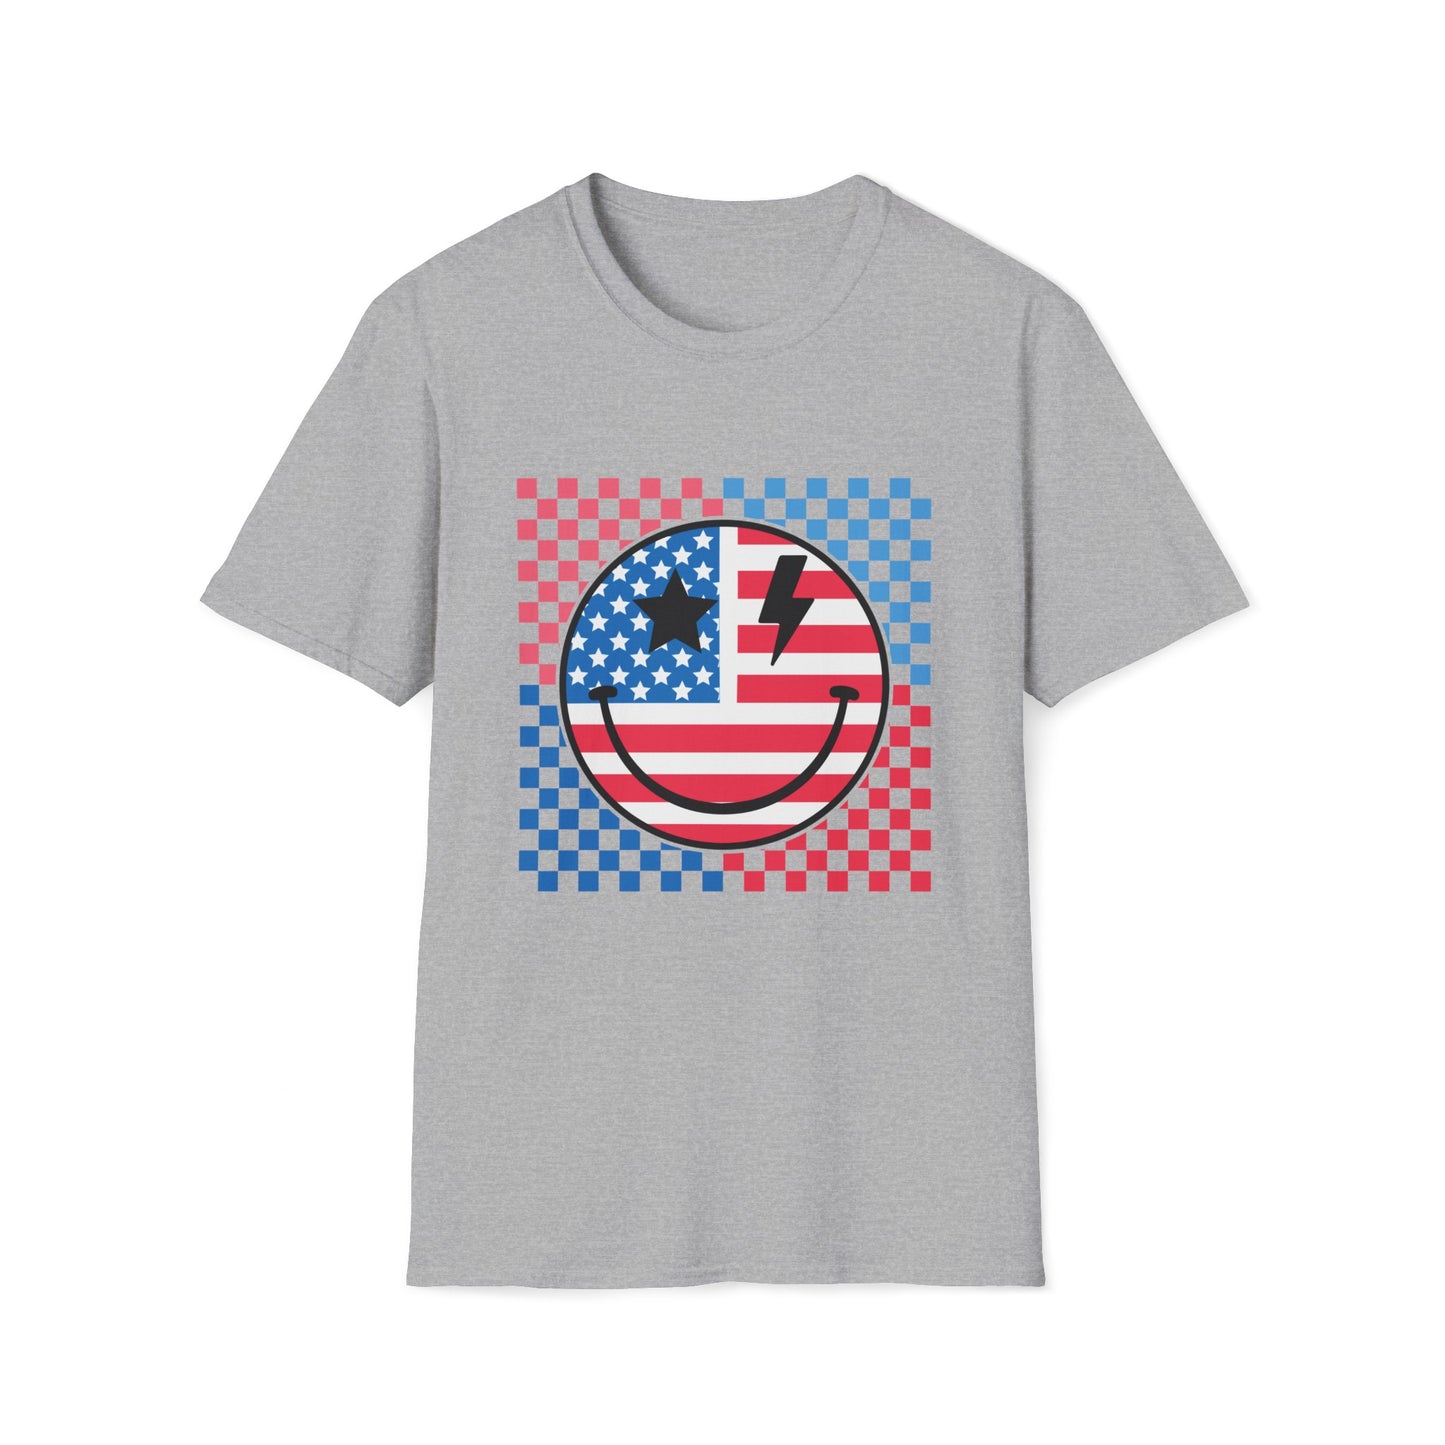 American Smile - Unisex Softstyle T-Shirt